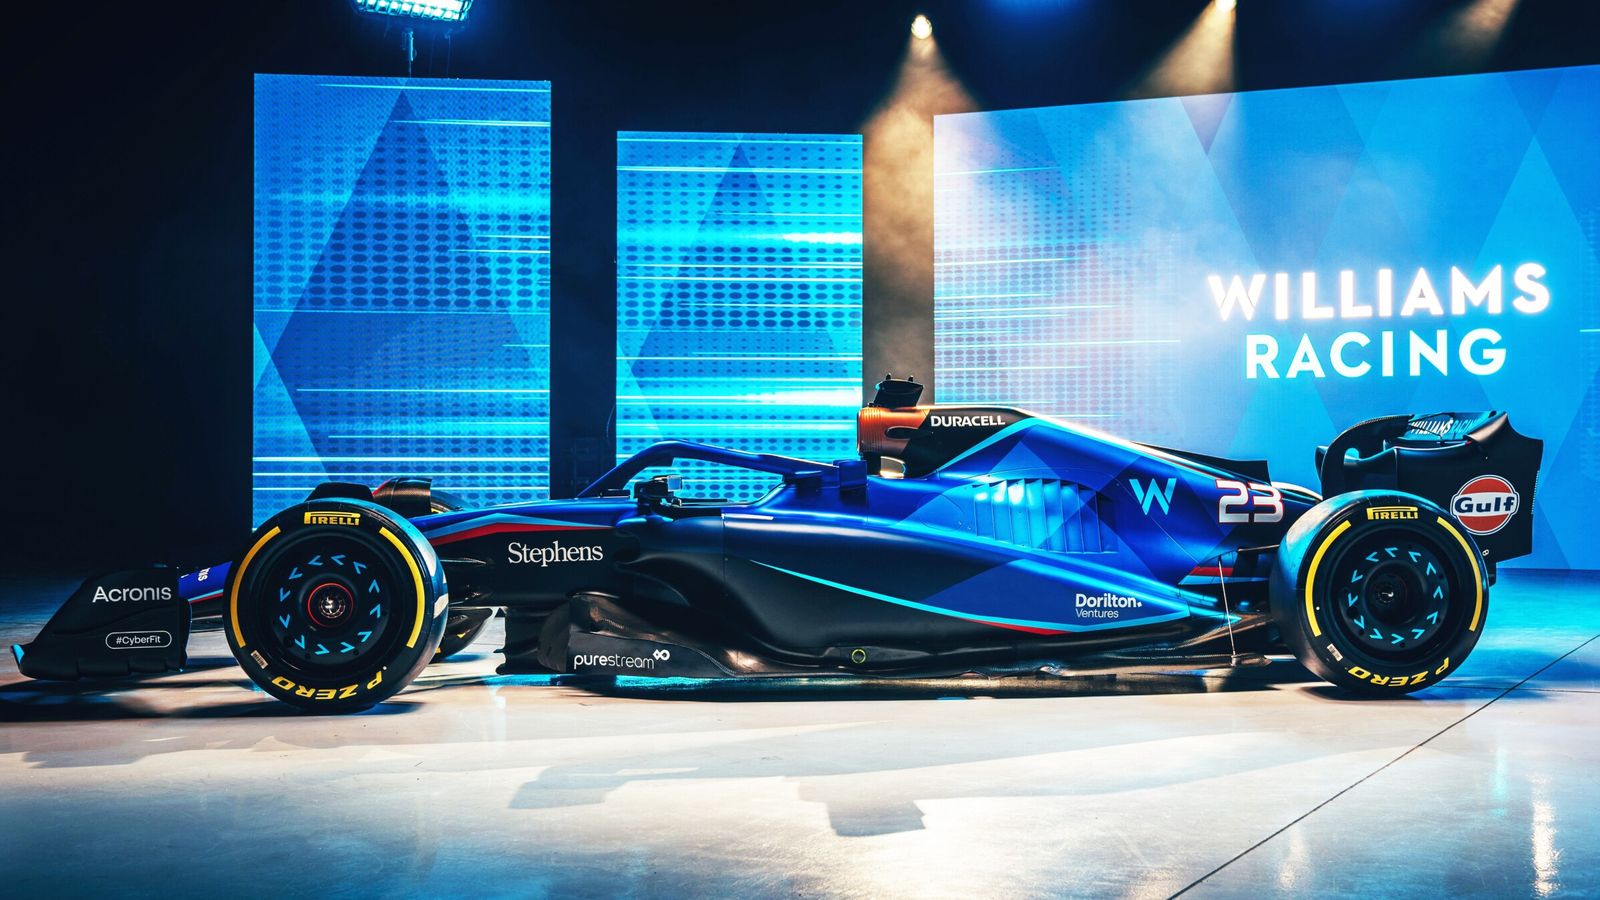 Formula 1 launches: Williams reveal sleek new car livery and Gulf Oil partnership for 2023 season